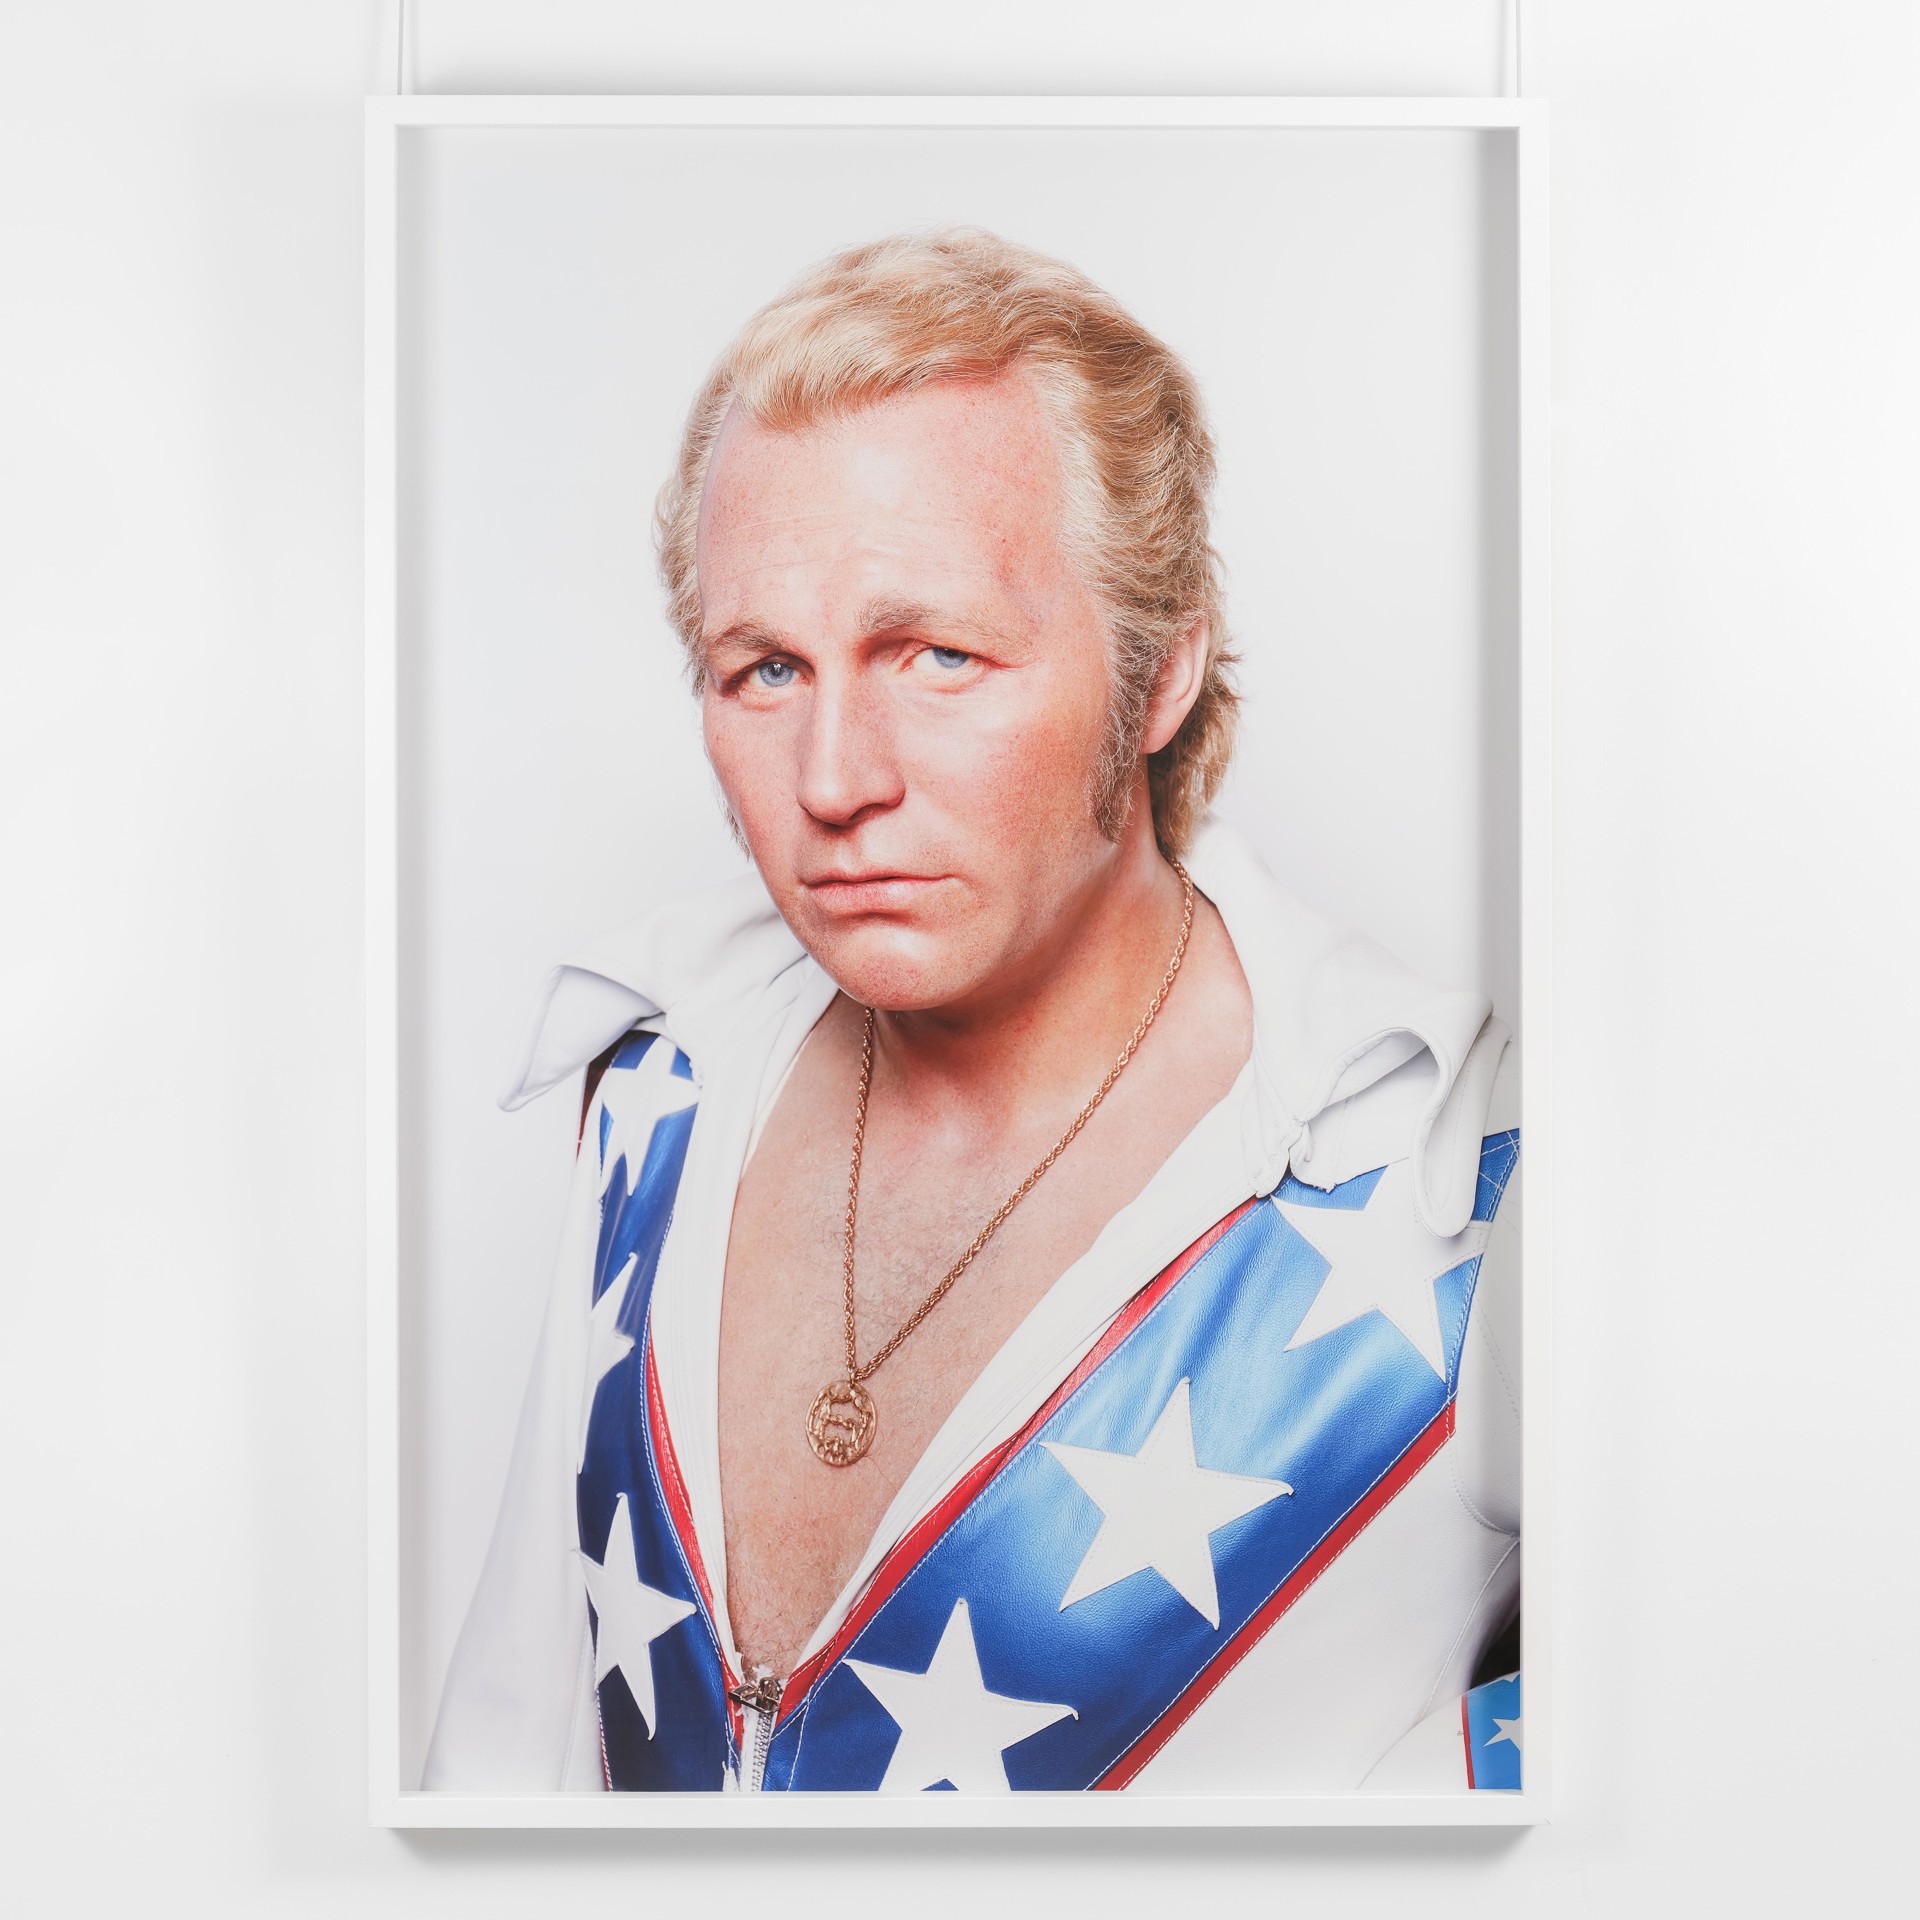 This is not Evel Knievel by Peter Andrew Lusztyk | Uncanny Valley